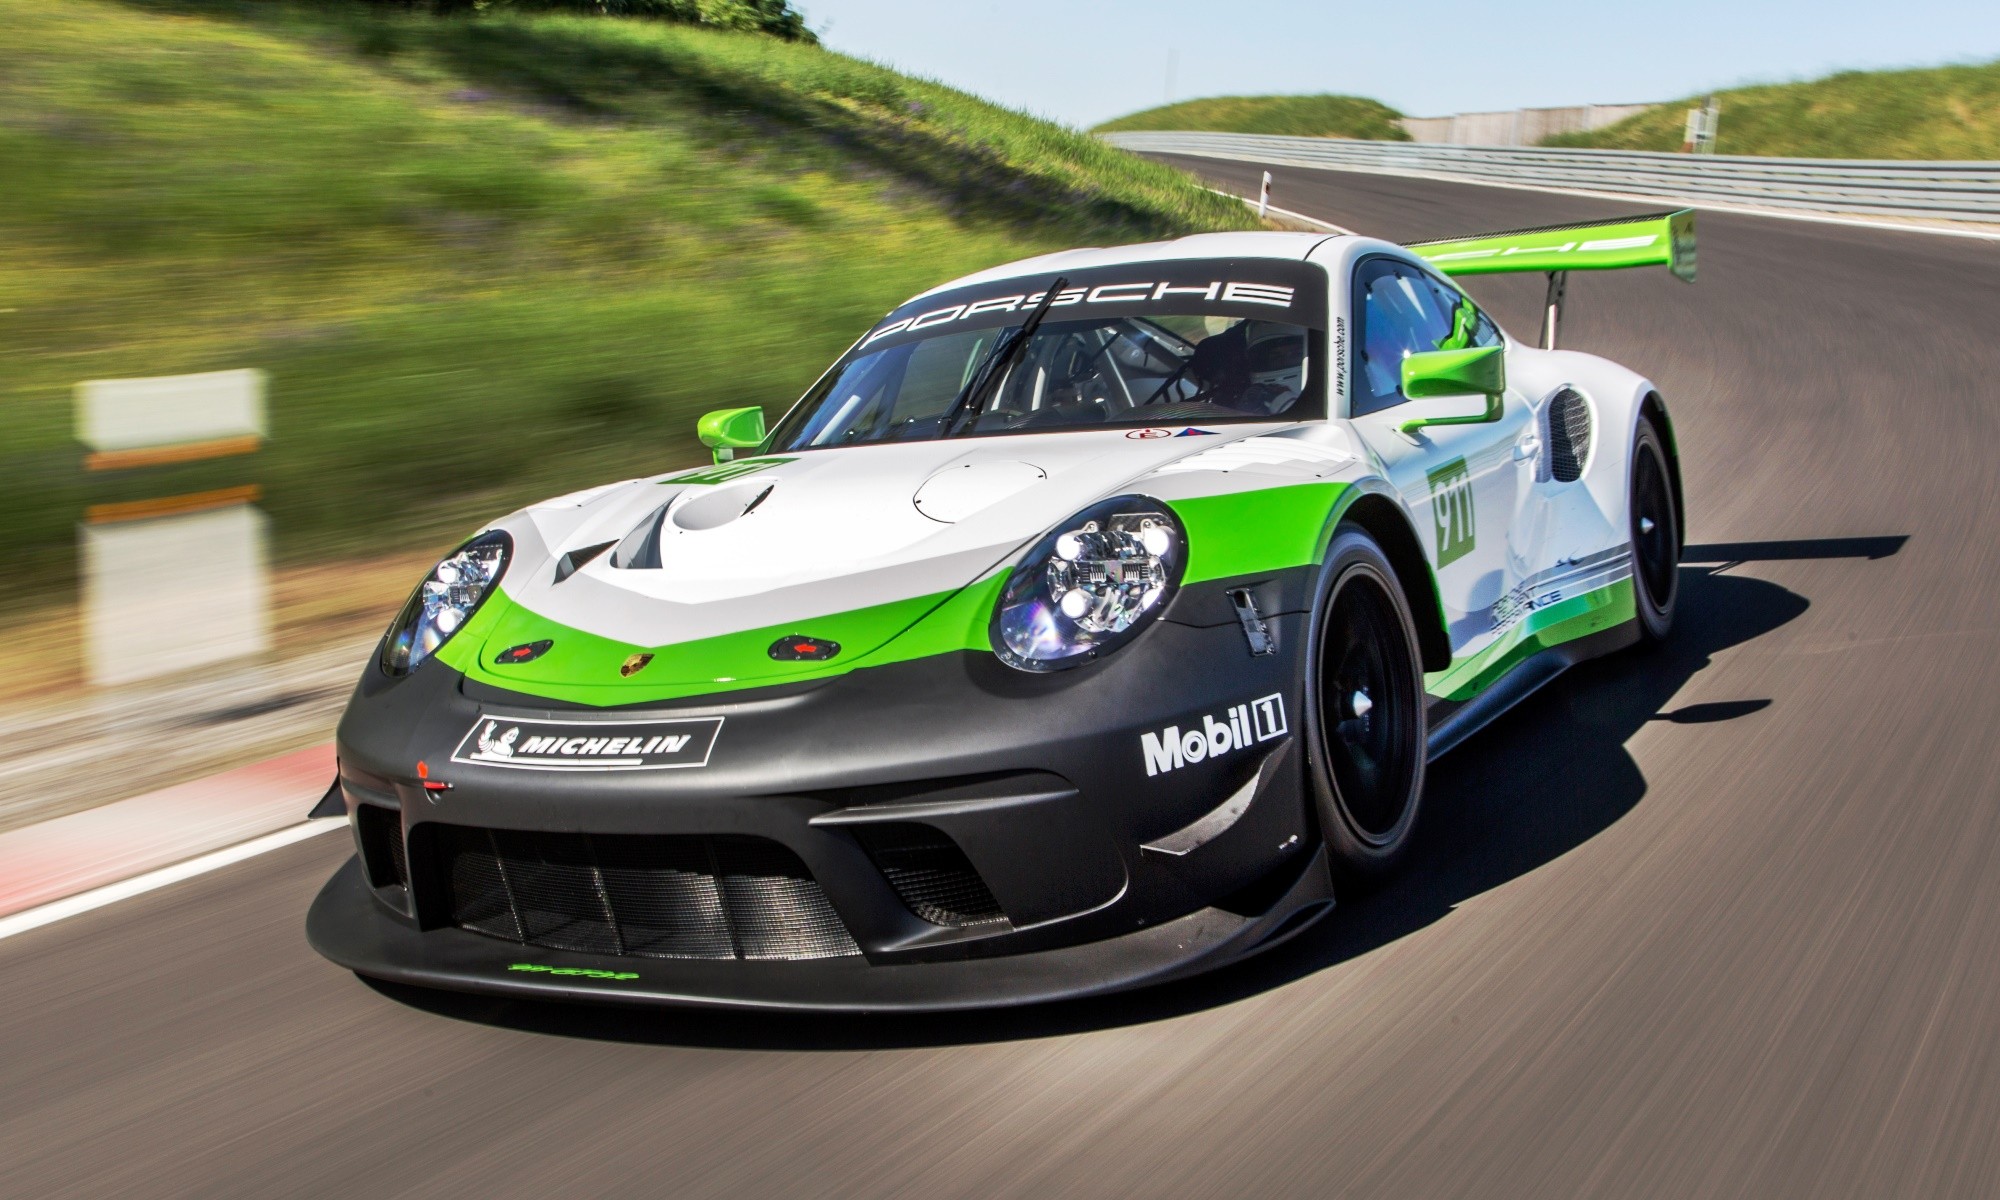 A new racer enters the world of motorsport, the Porsche 911 GT3 R.